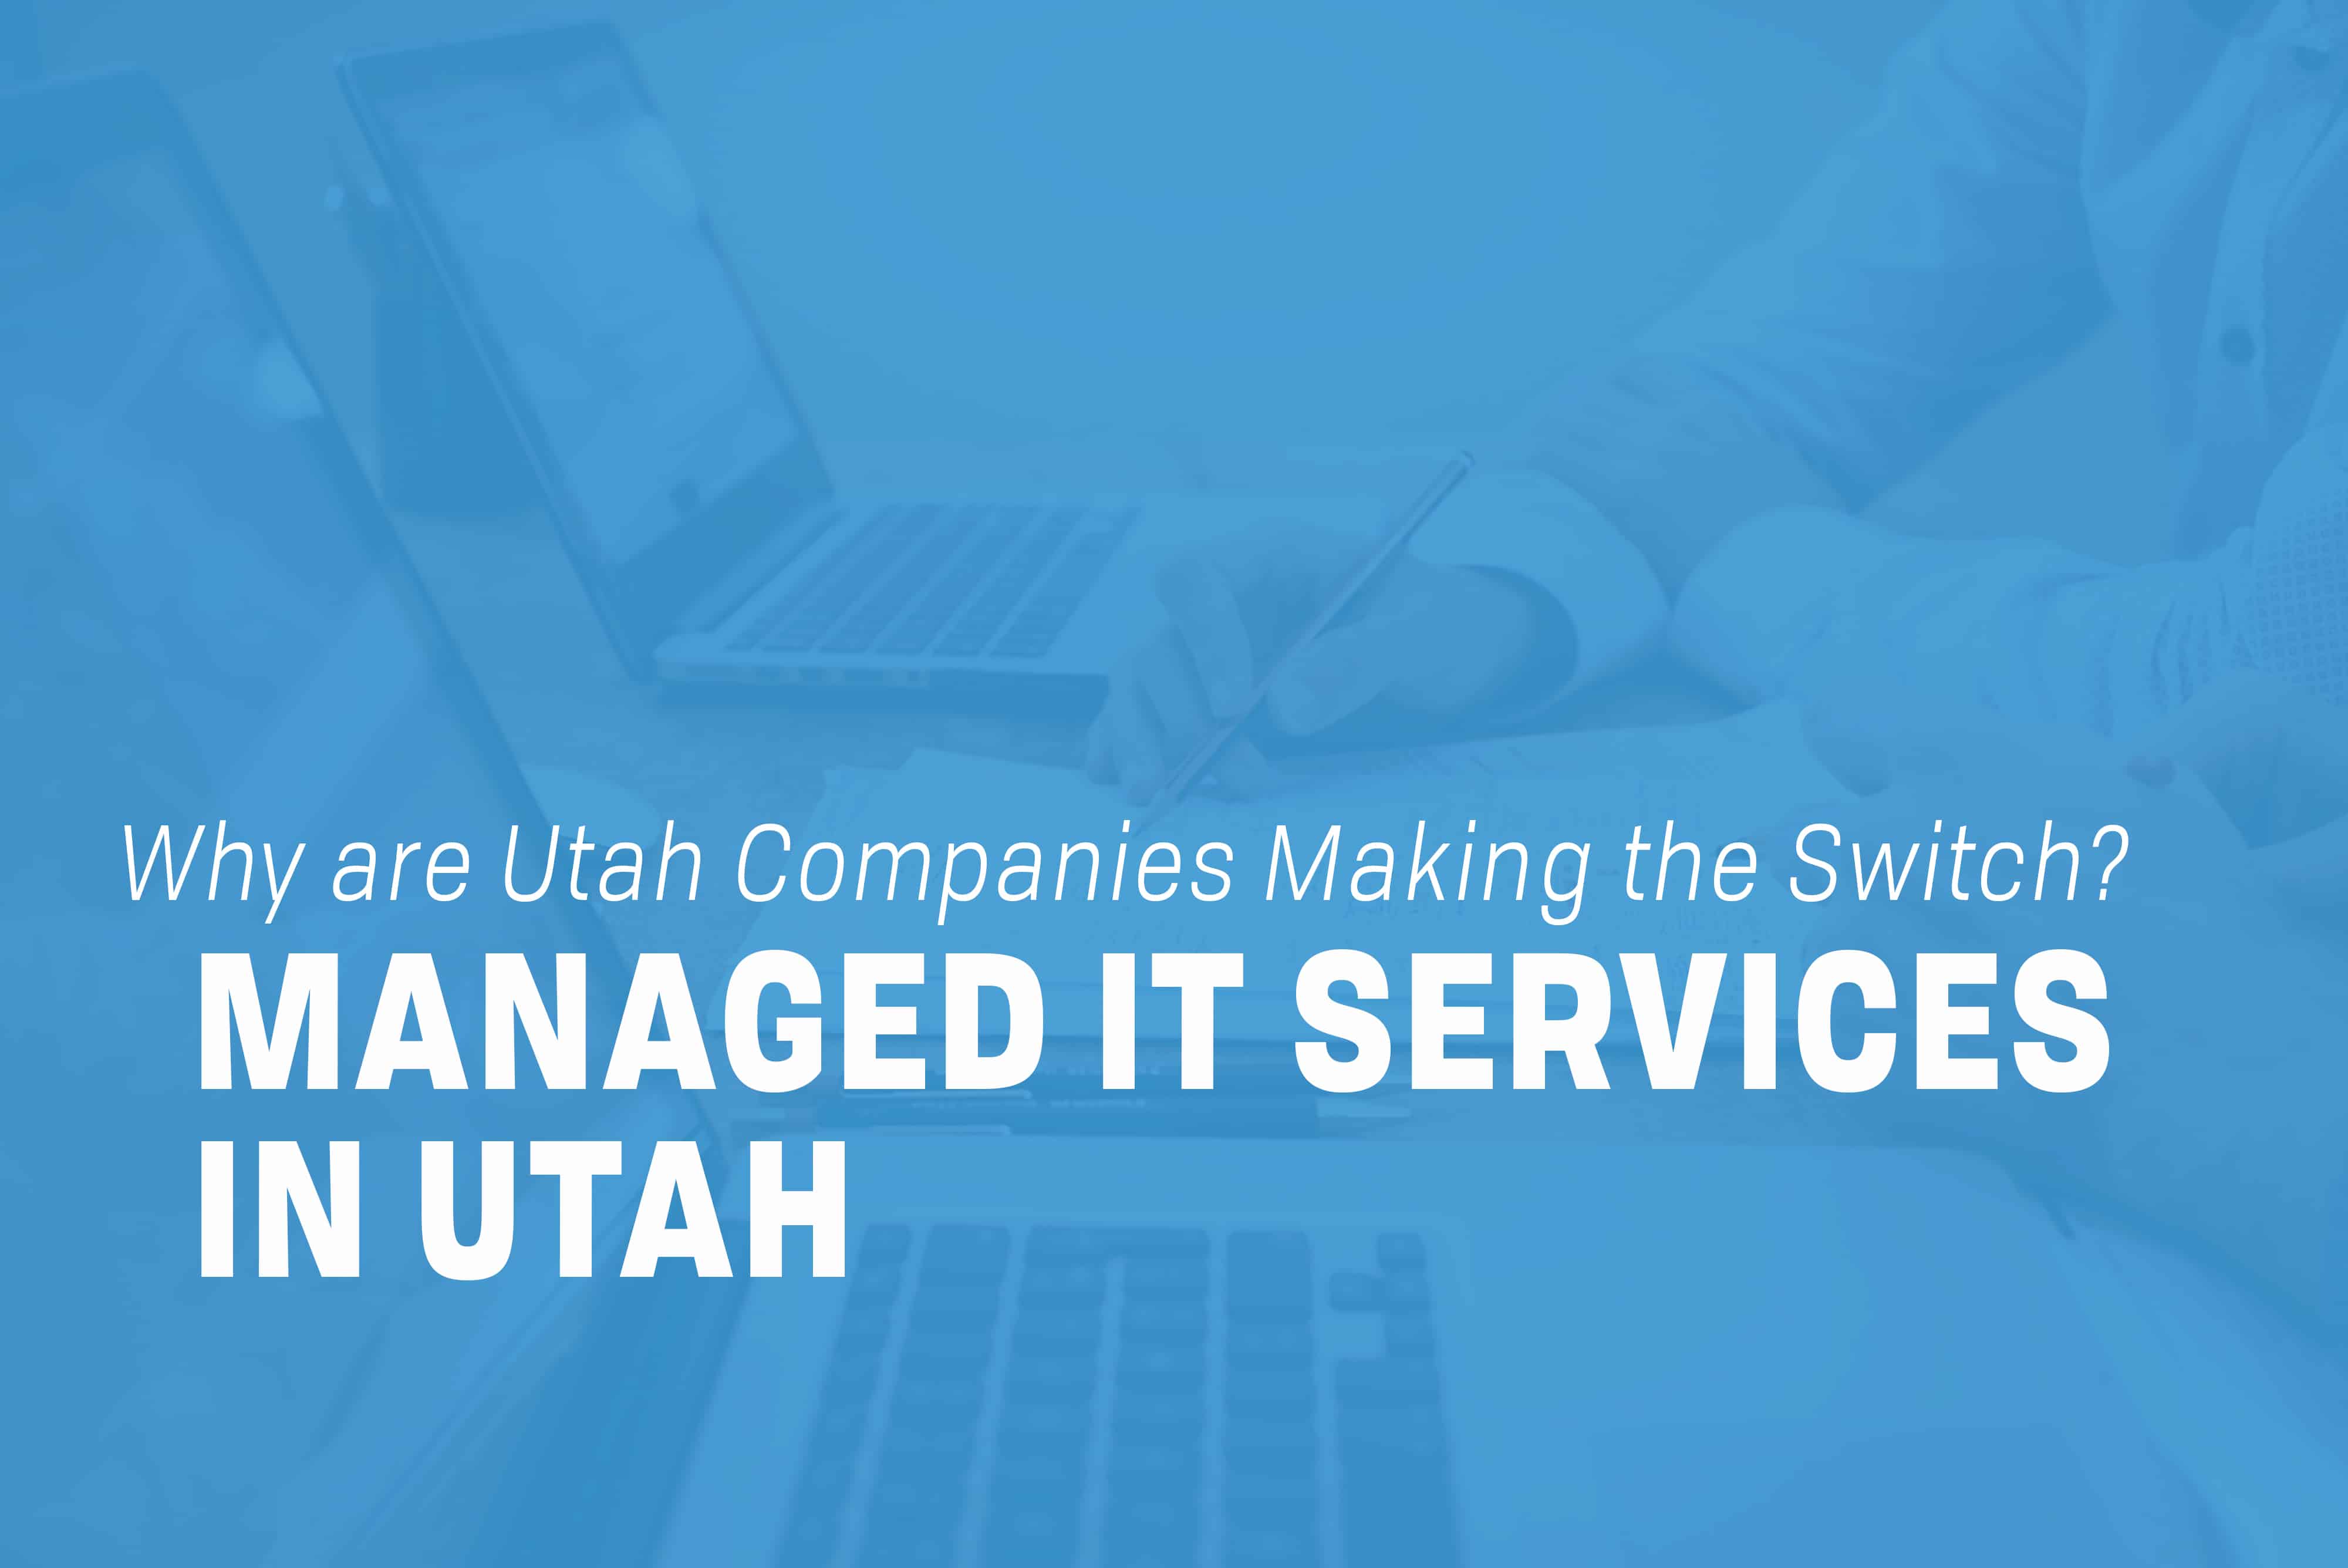 You are currently viewing Managed IT Services in Utah: Why are Utah Companies Making the Switch?